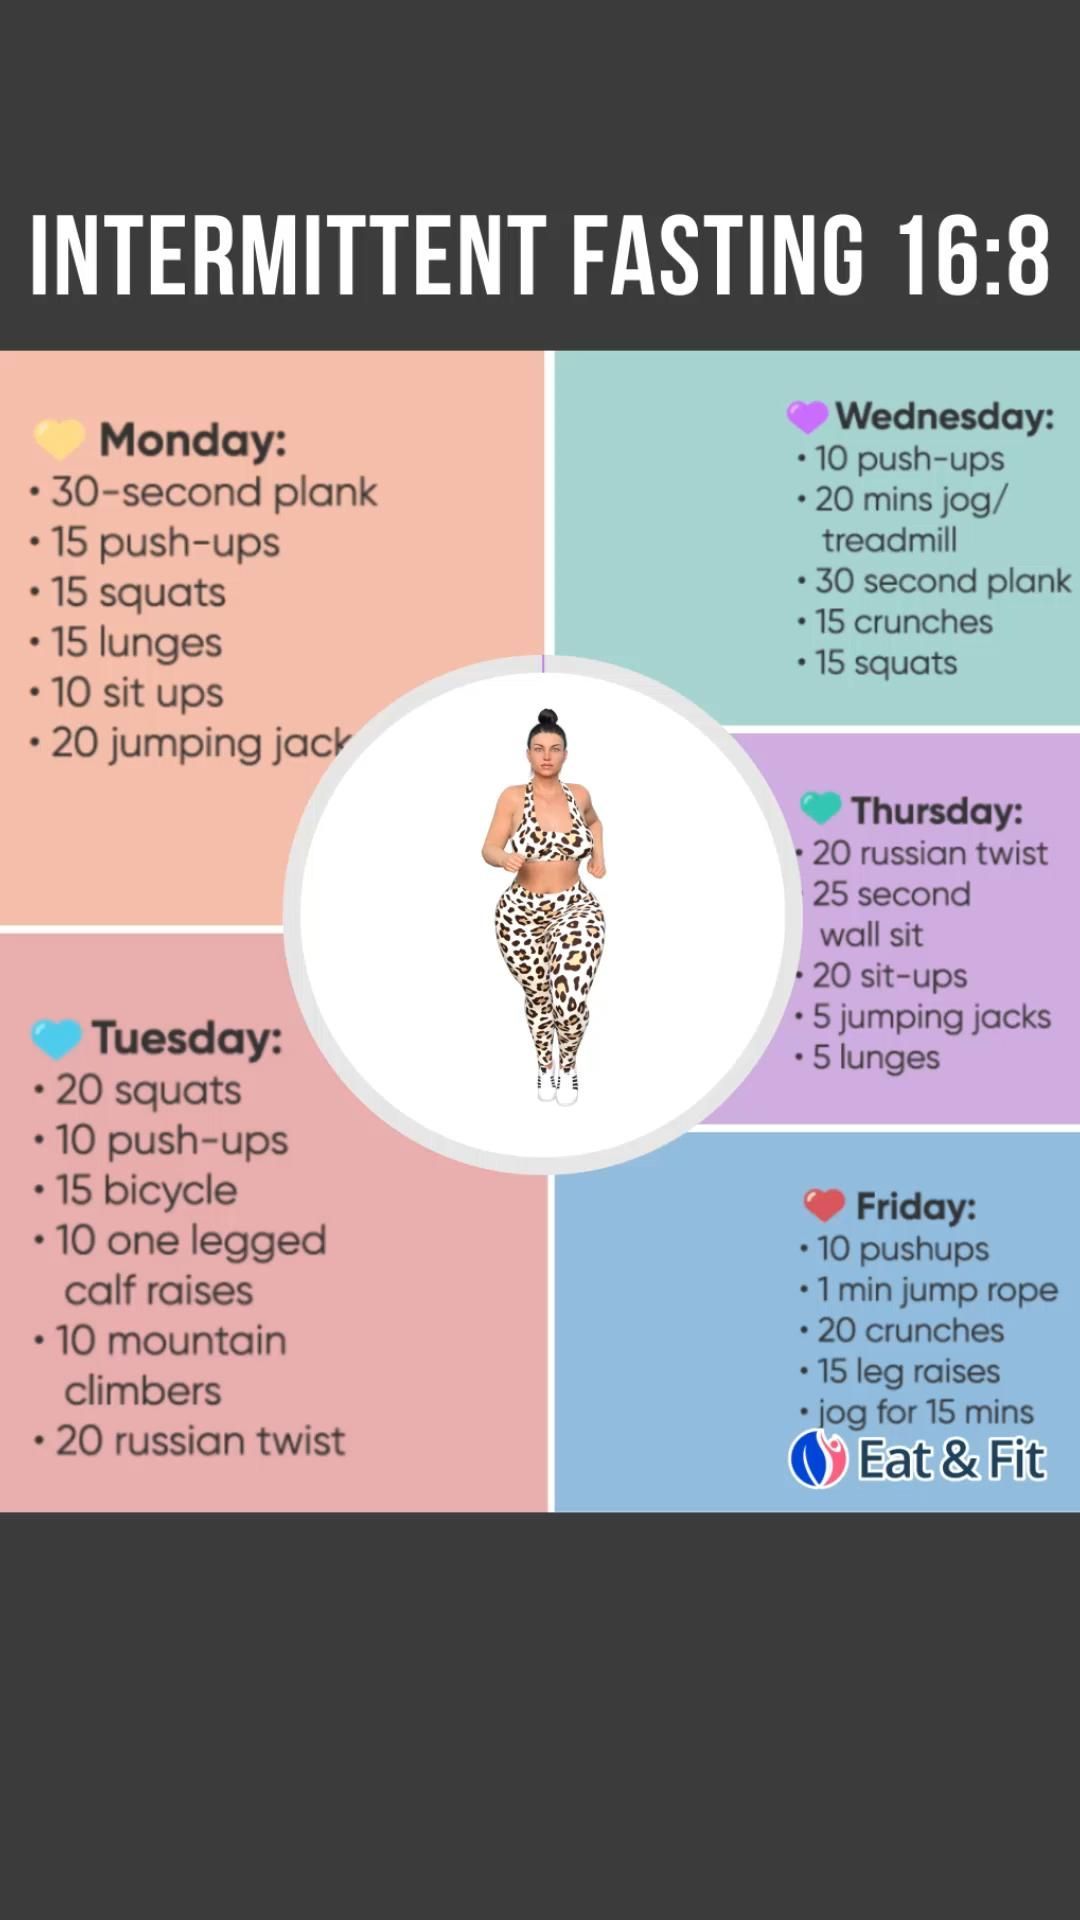 ??Lose Weight at Home. Get a personal meal plan.? - ??Lose Weight at Home. Get a personal meal plan.? -   19 fitness Training plan ideas